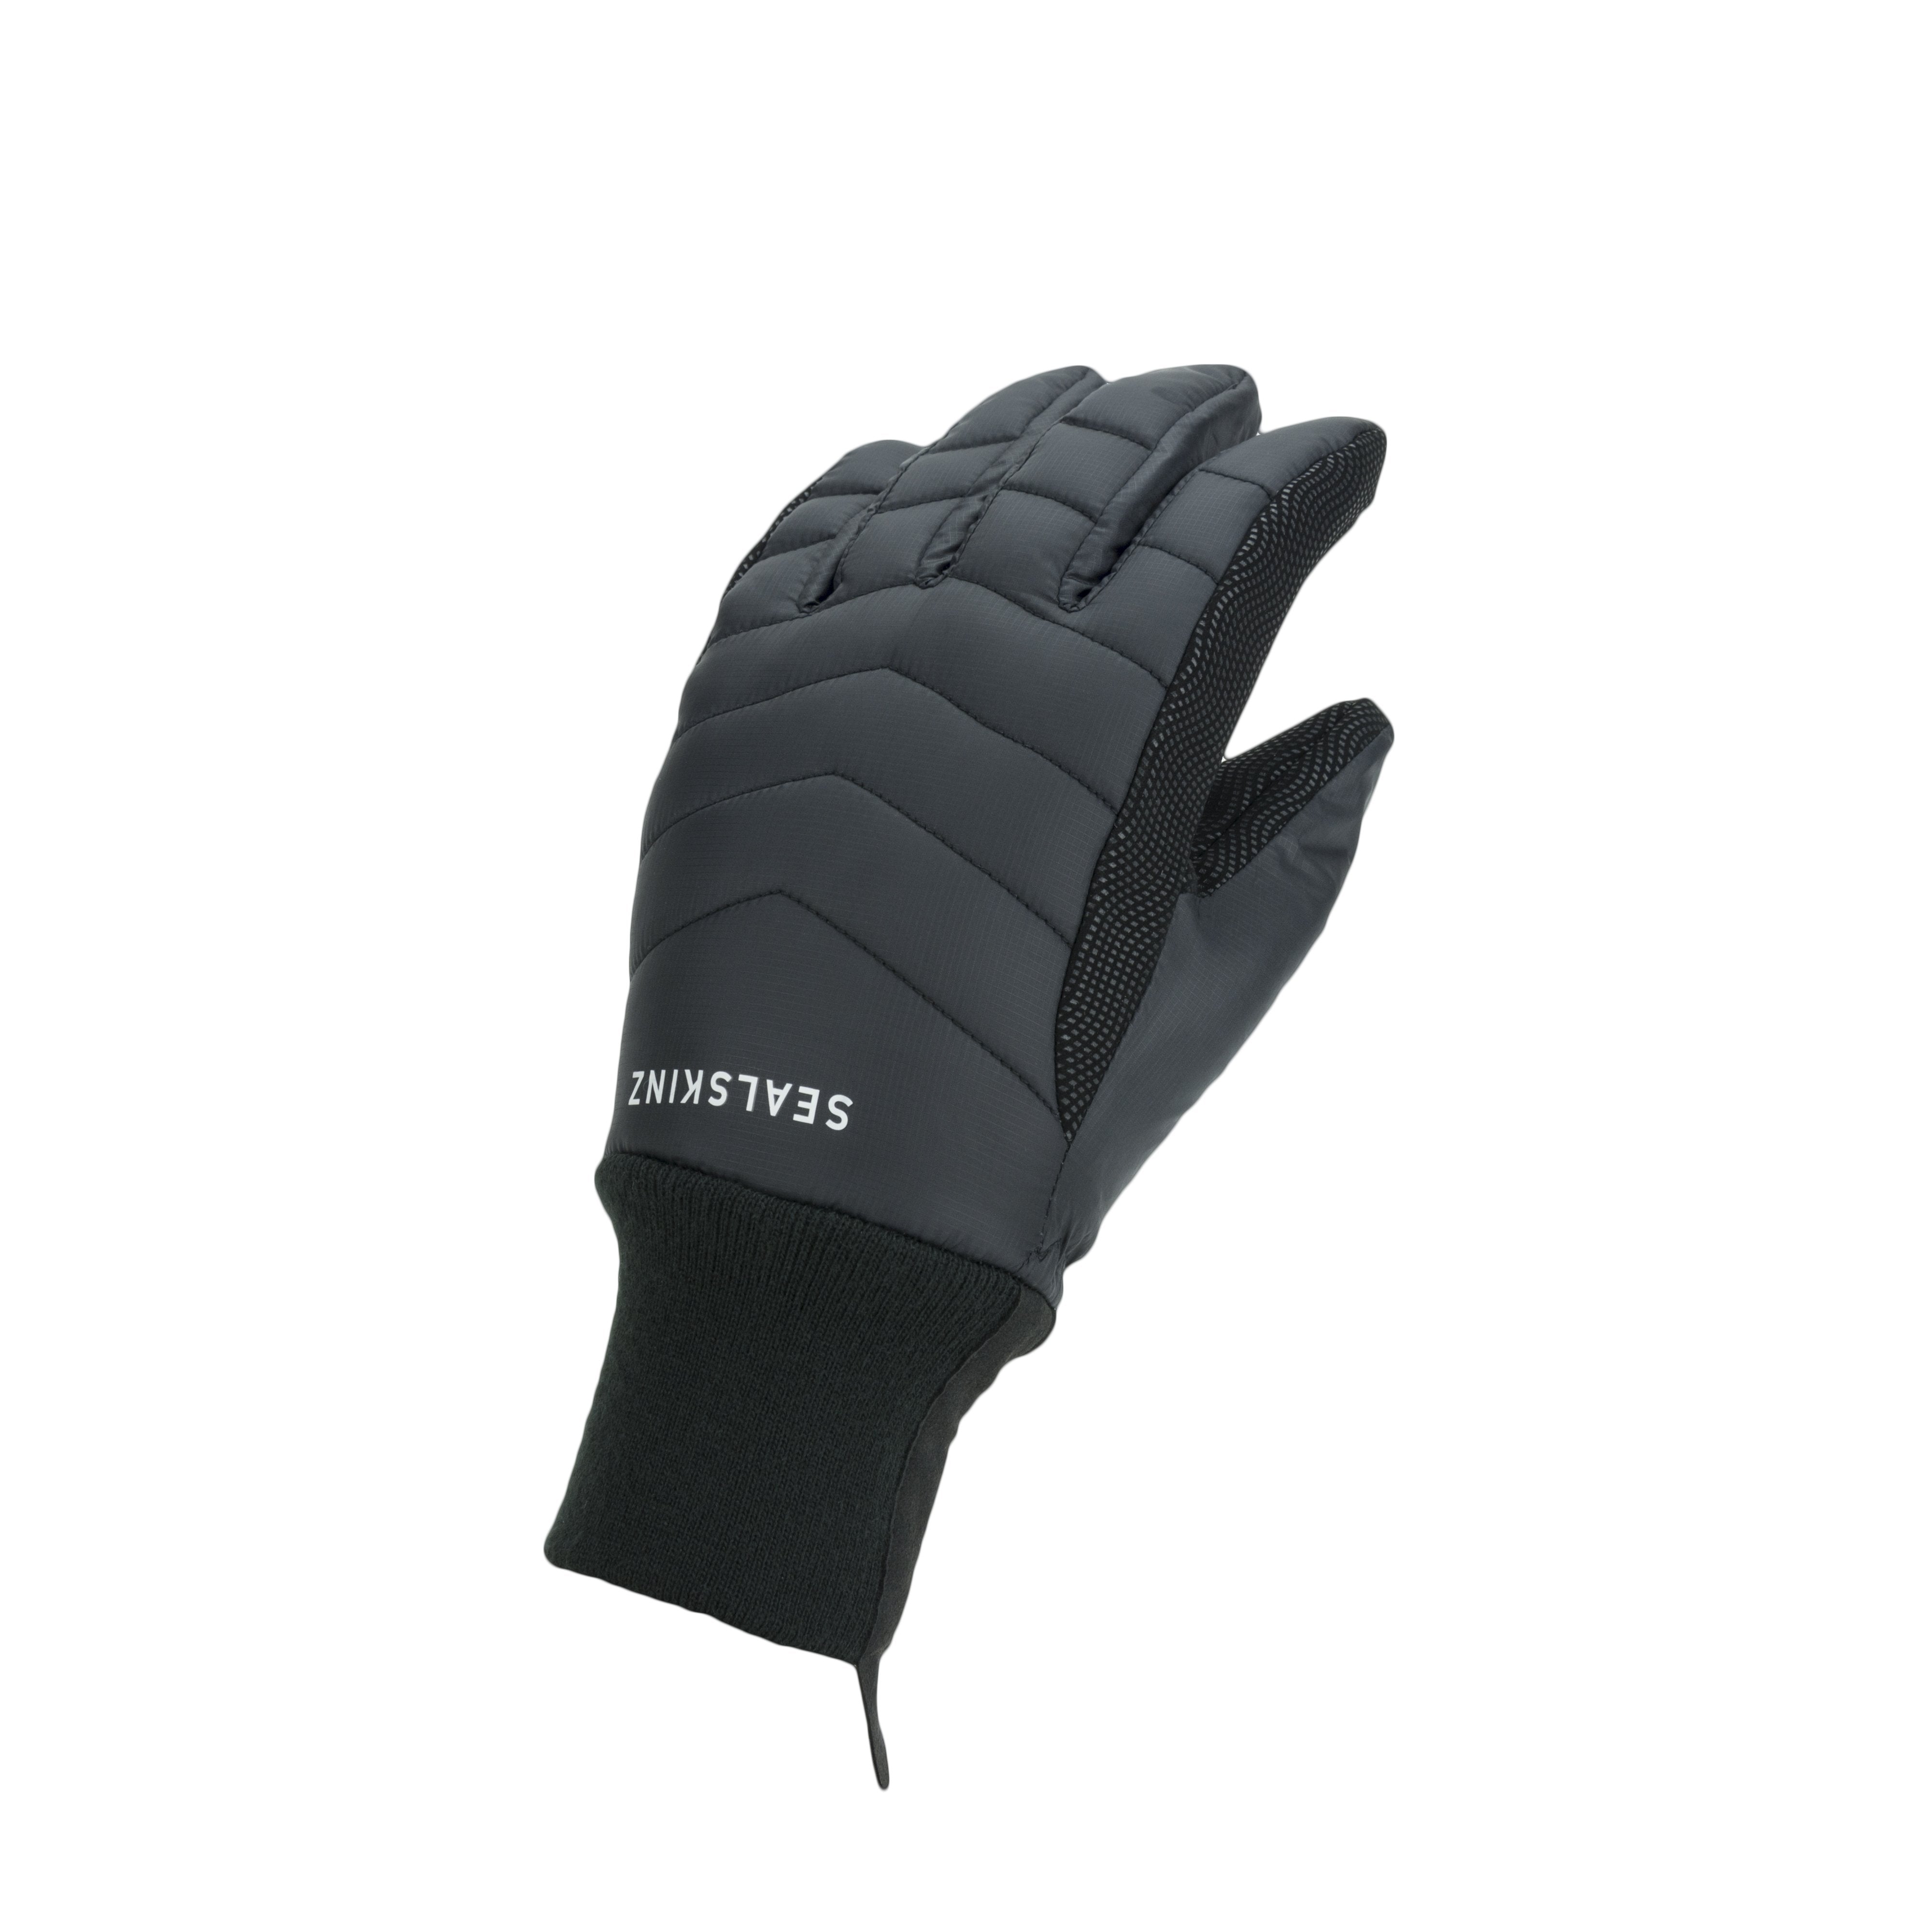 Oil Shield®, 26 High Temp Neoprene Insulated Gloves- Mens Size S and L